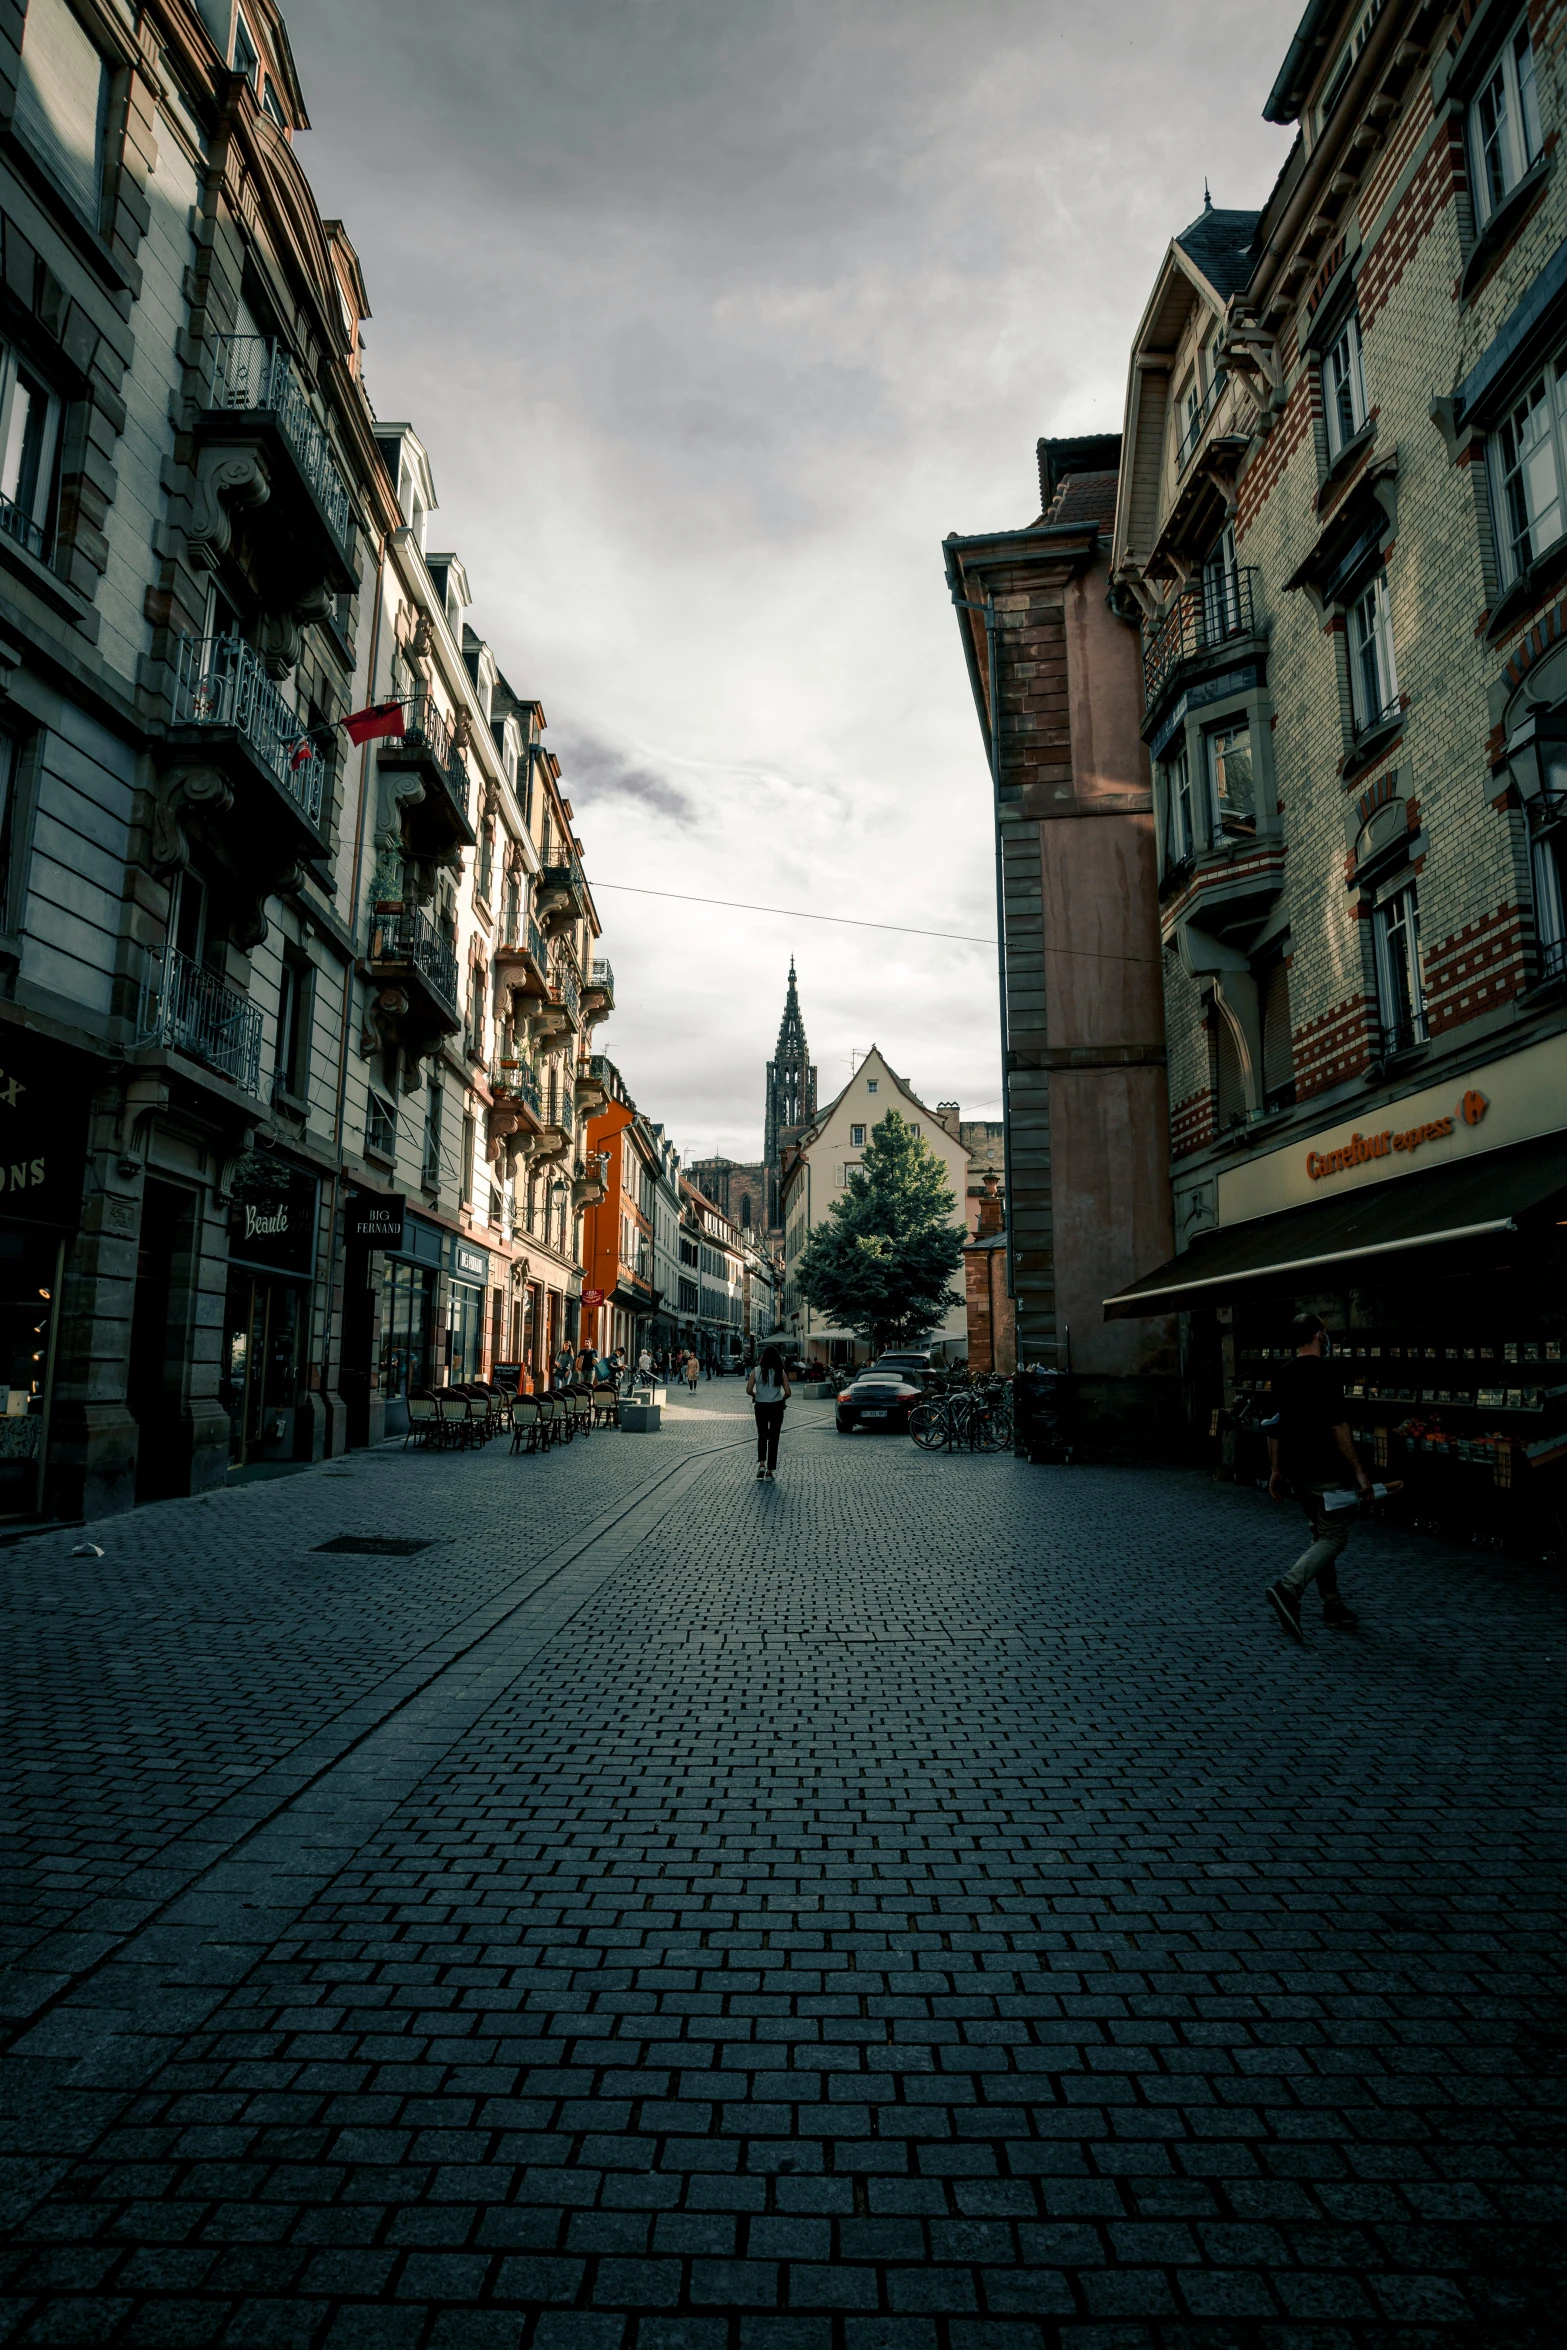 an image of people going down a cobblestone street